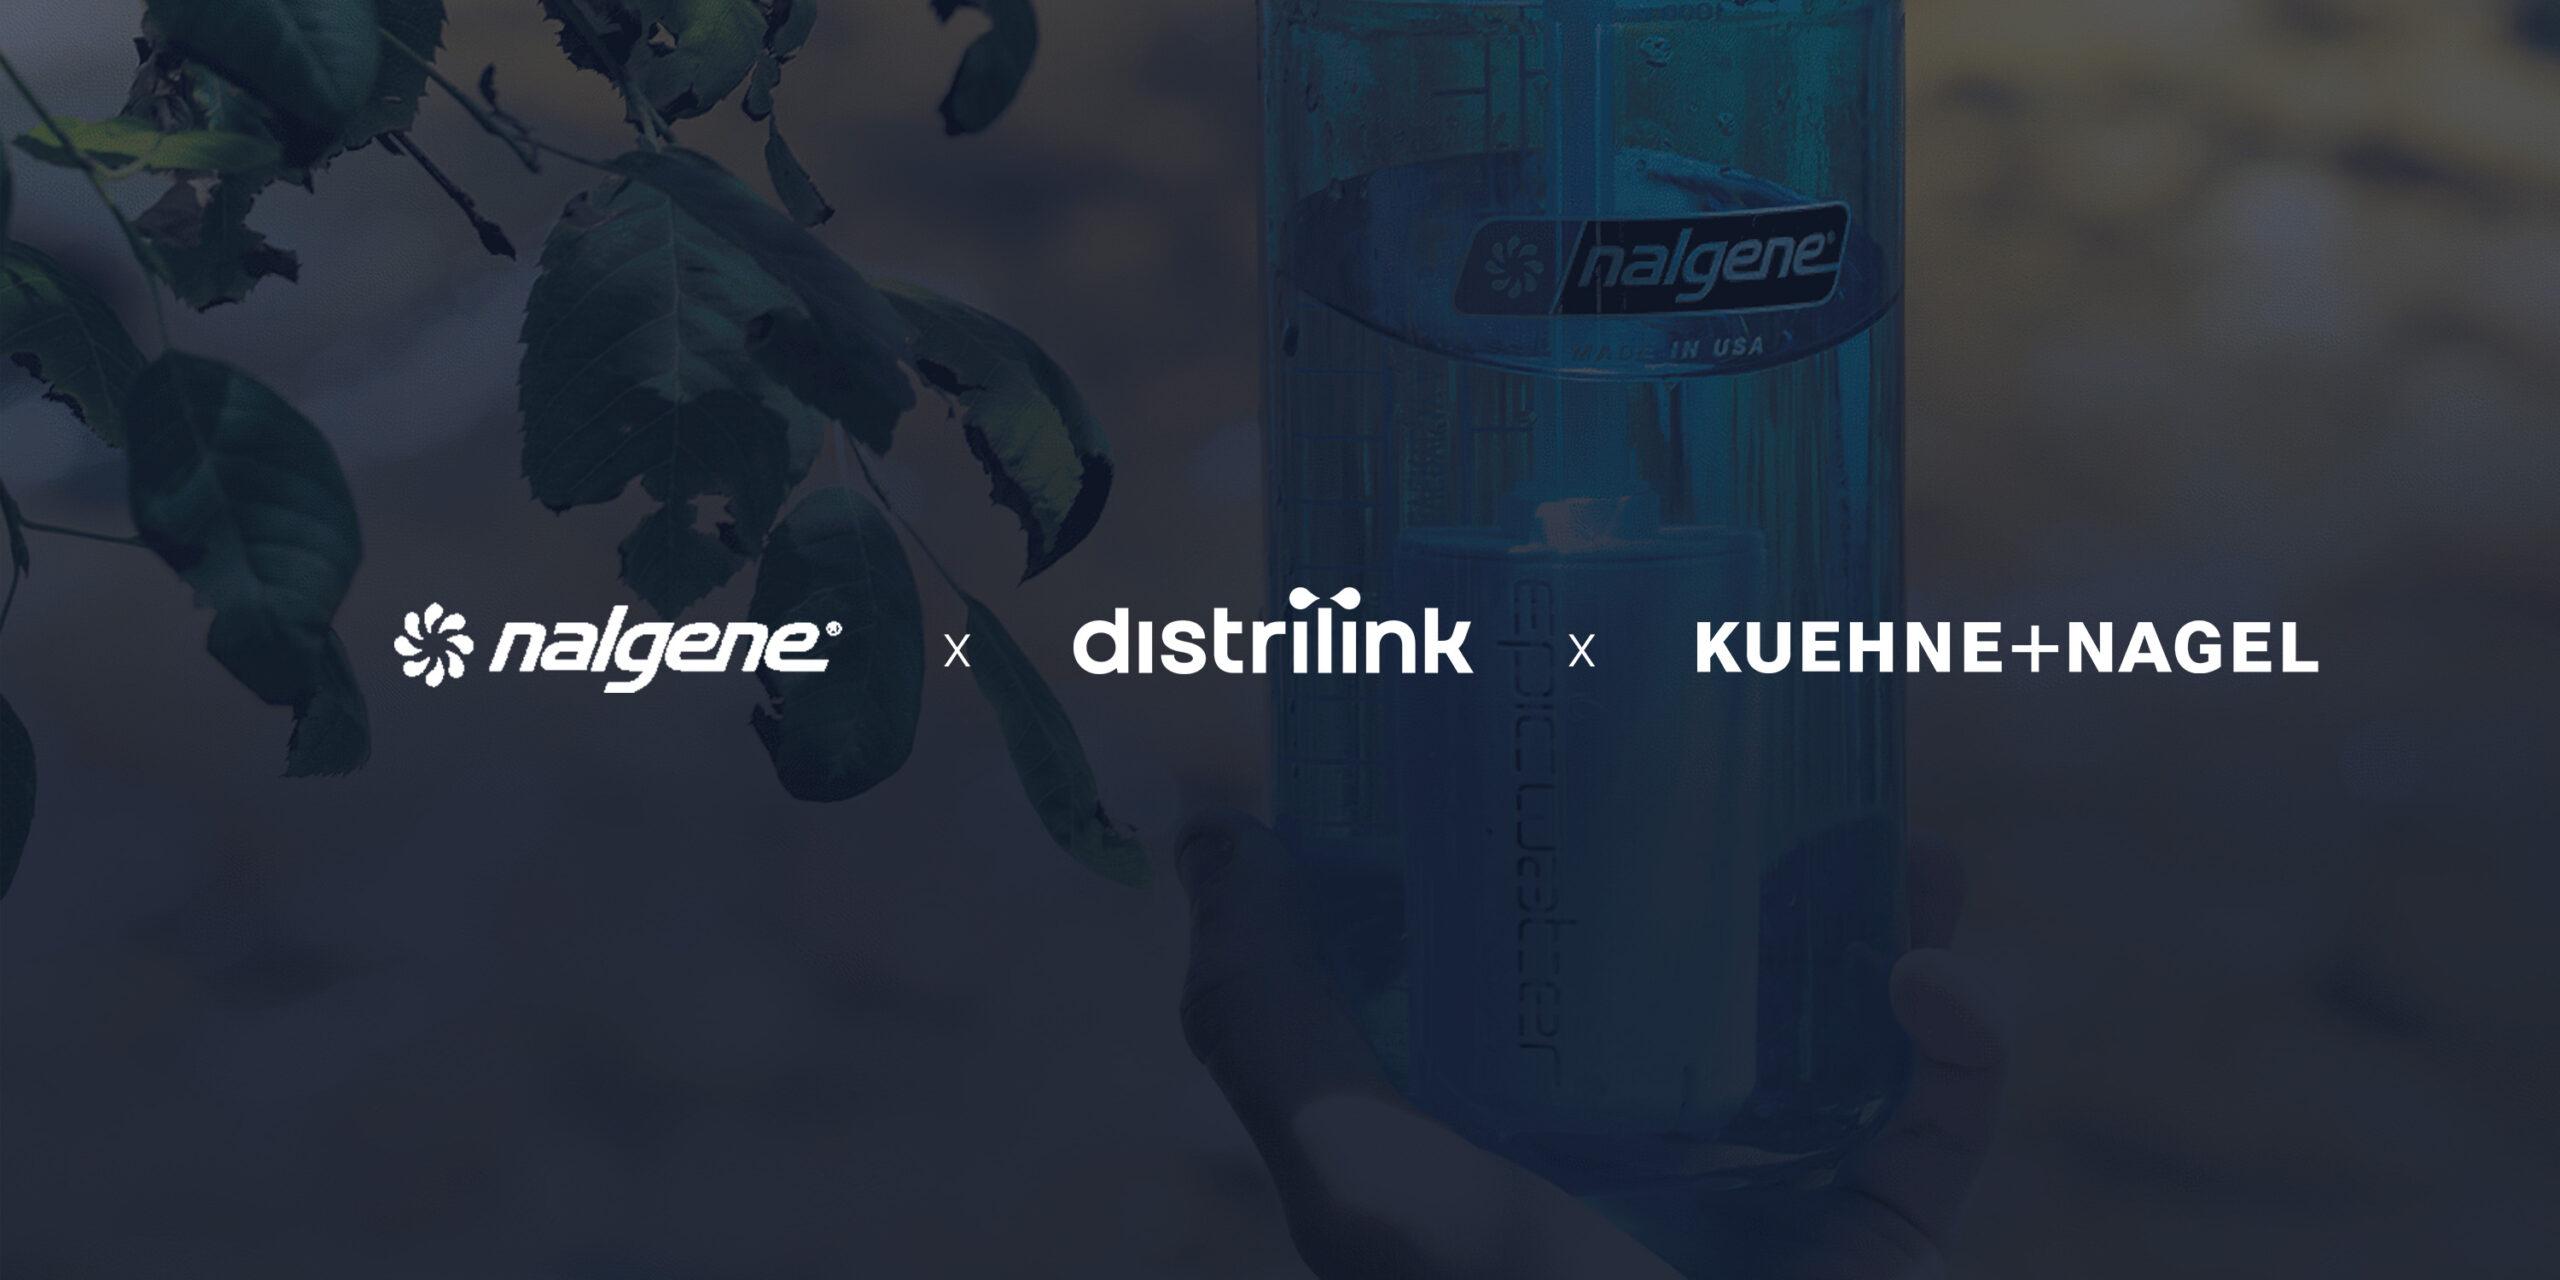 Nalgene Outdoor Products expands to Europe in tandem with Distrilink and Kuehne+Nagel